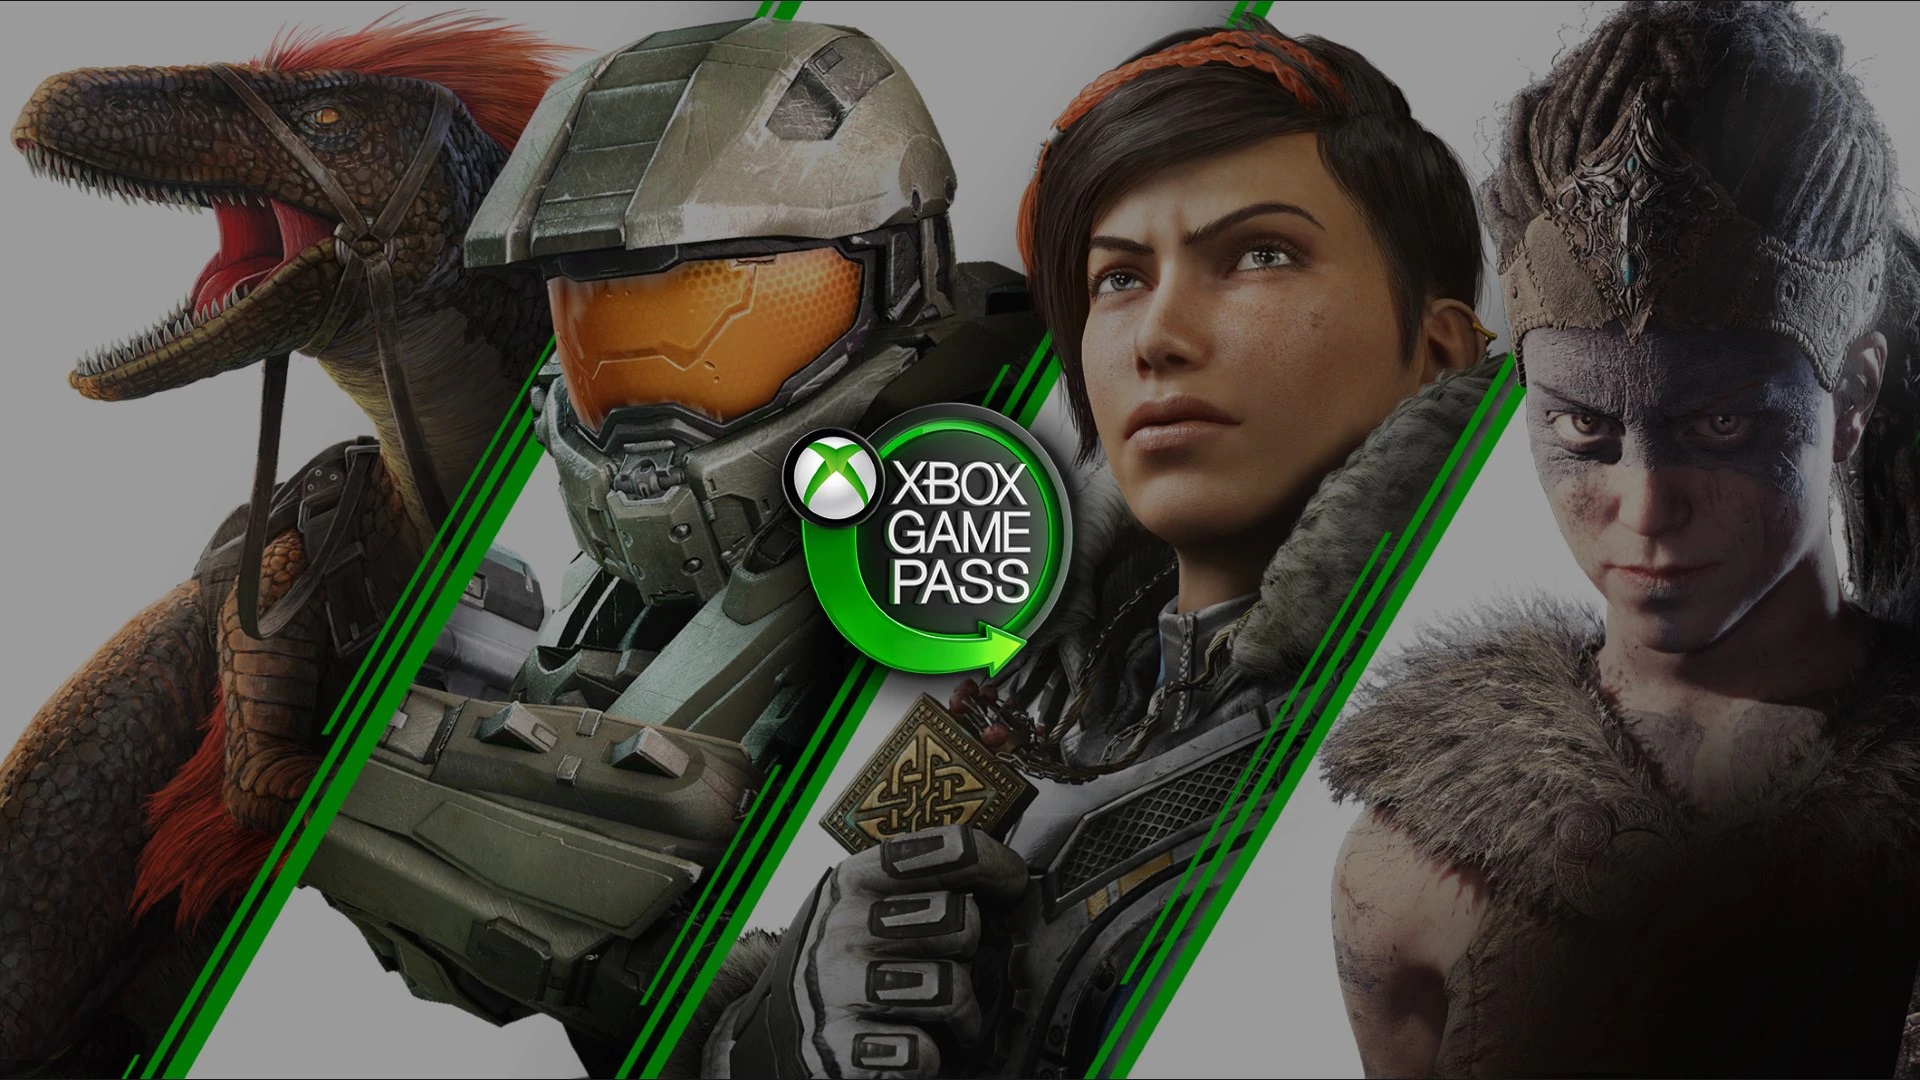 Xbox brings its cloud gaming service to Meta Quest in December